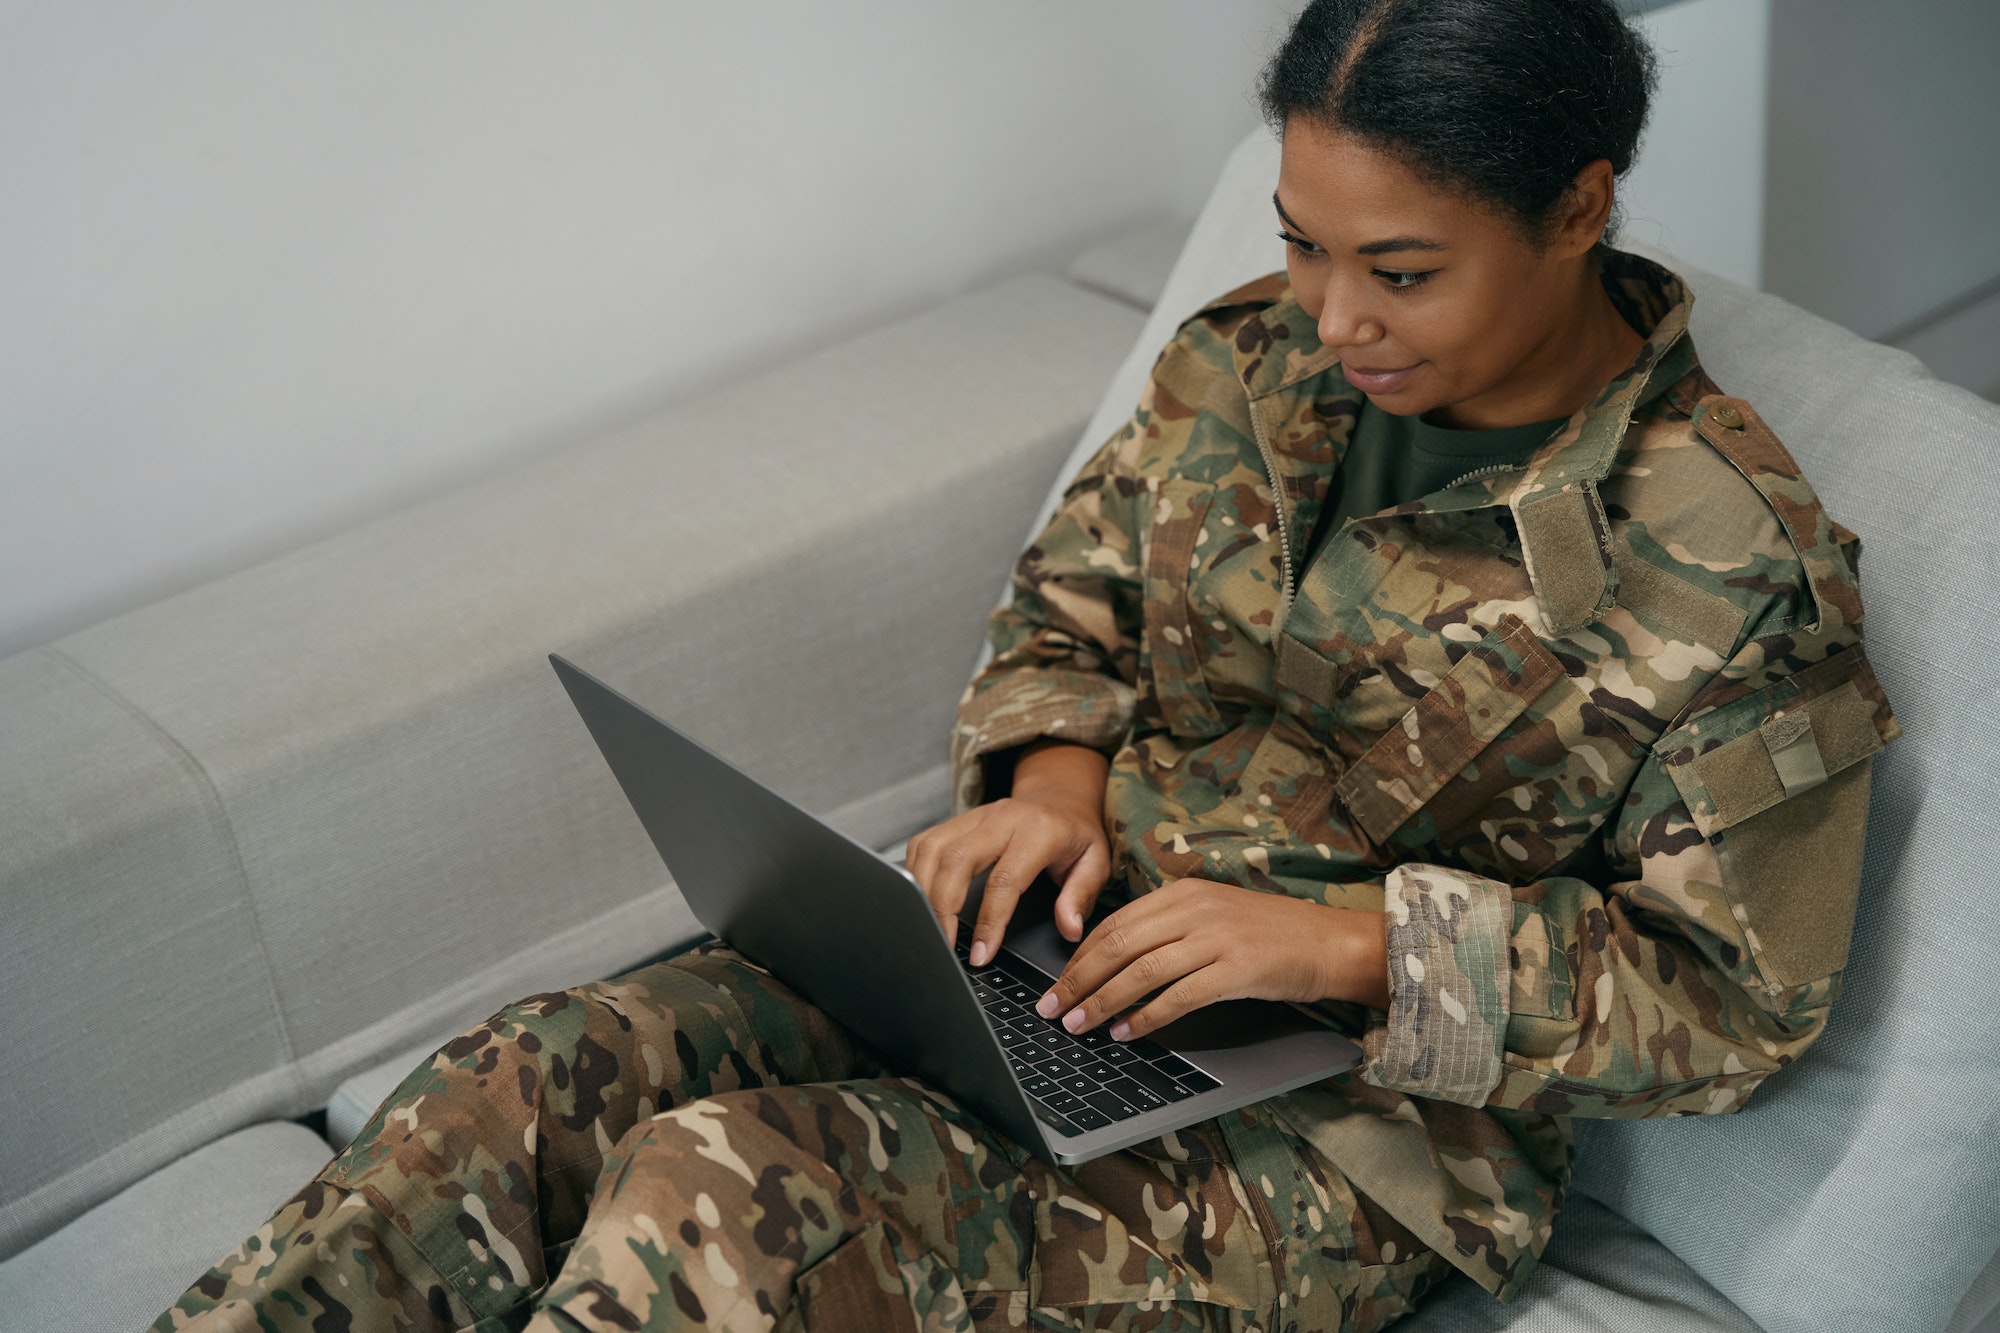 Cute female soldier is typing something in a laptop